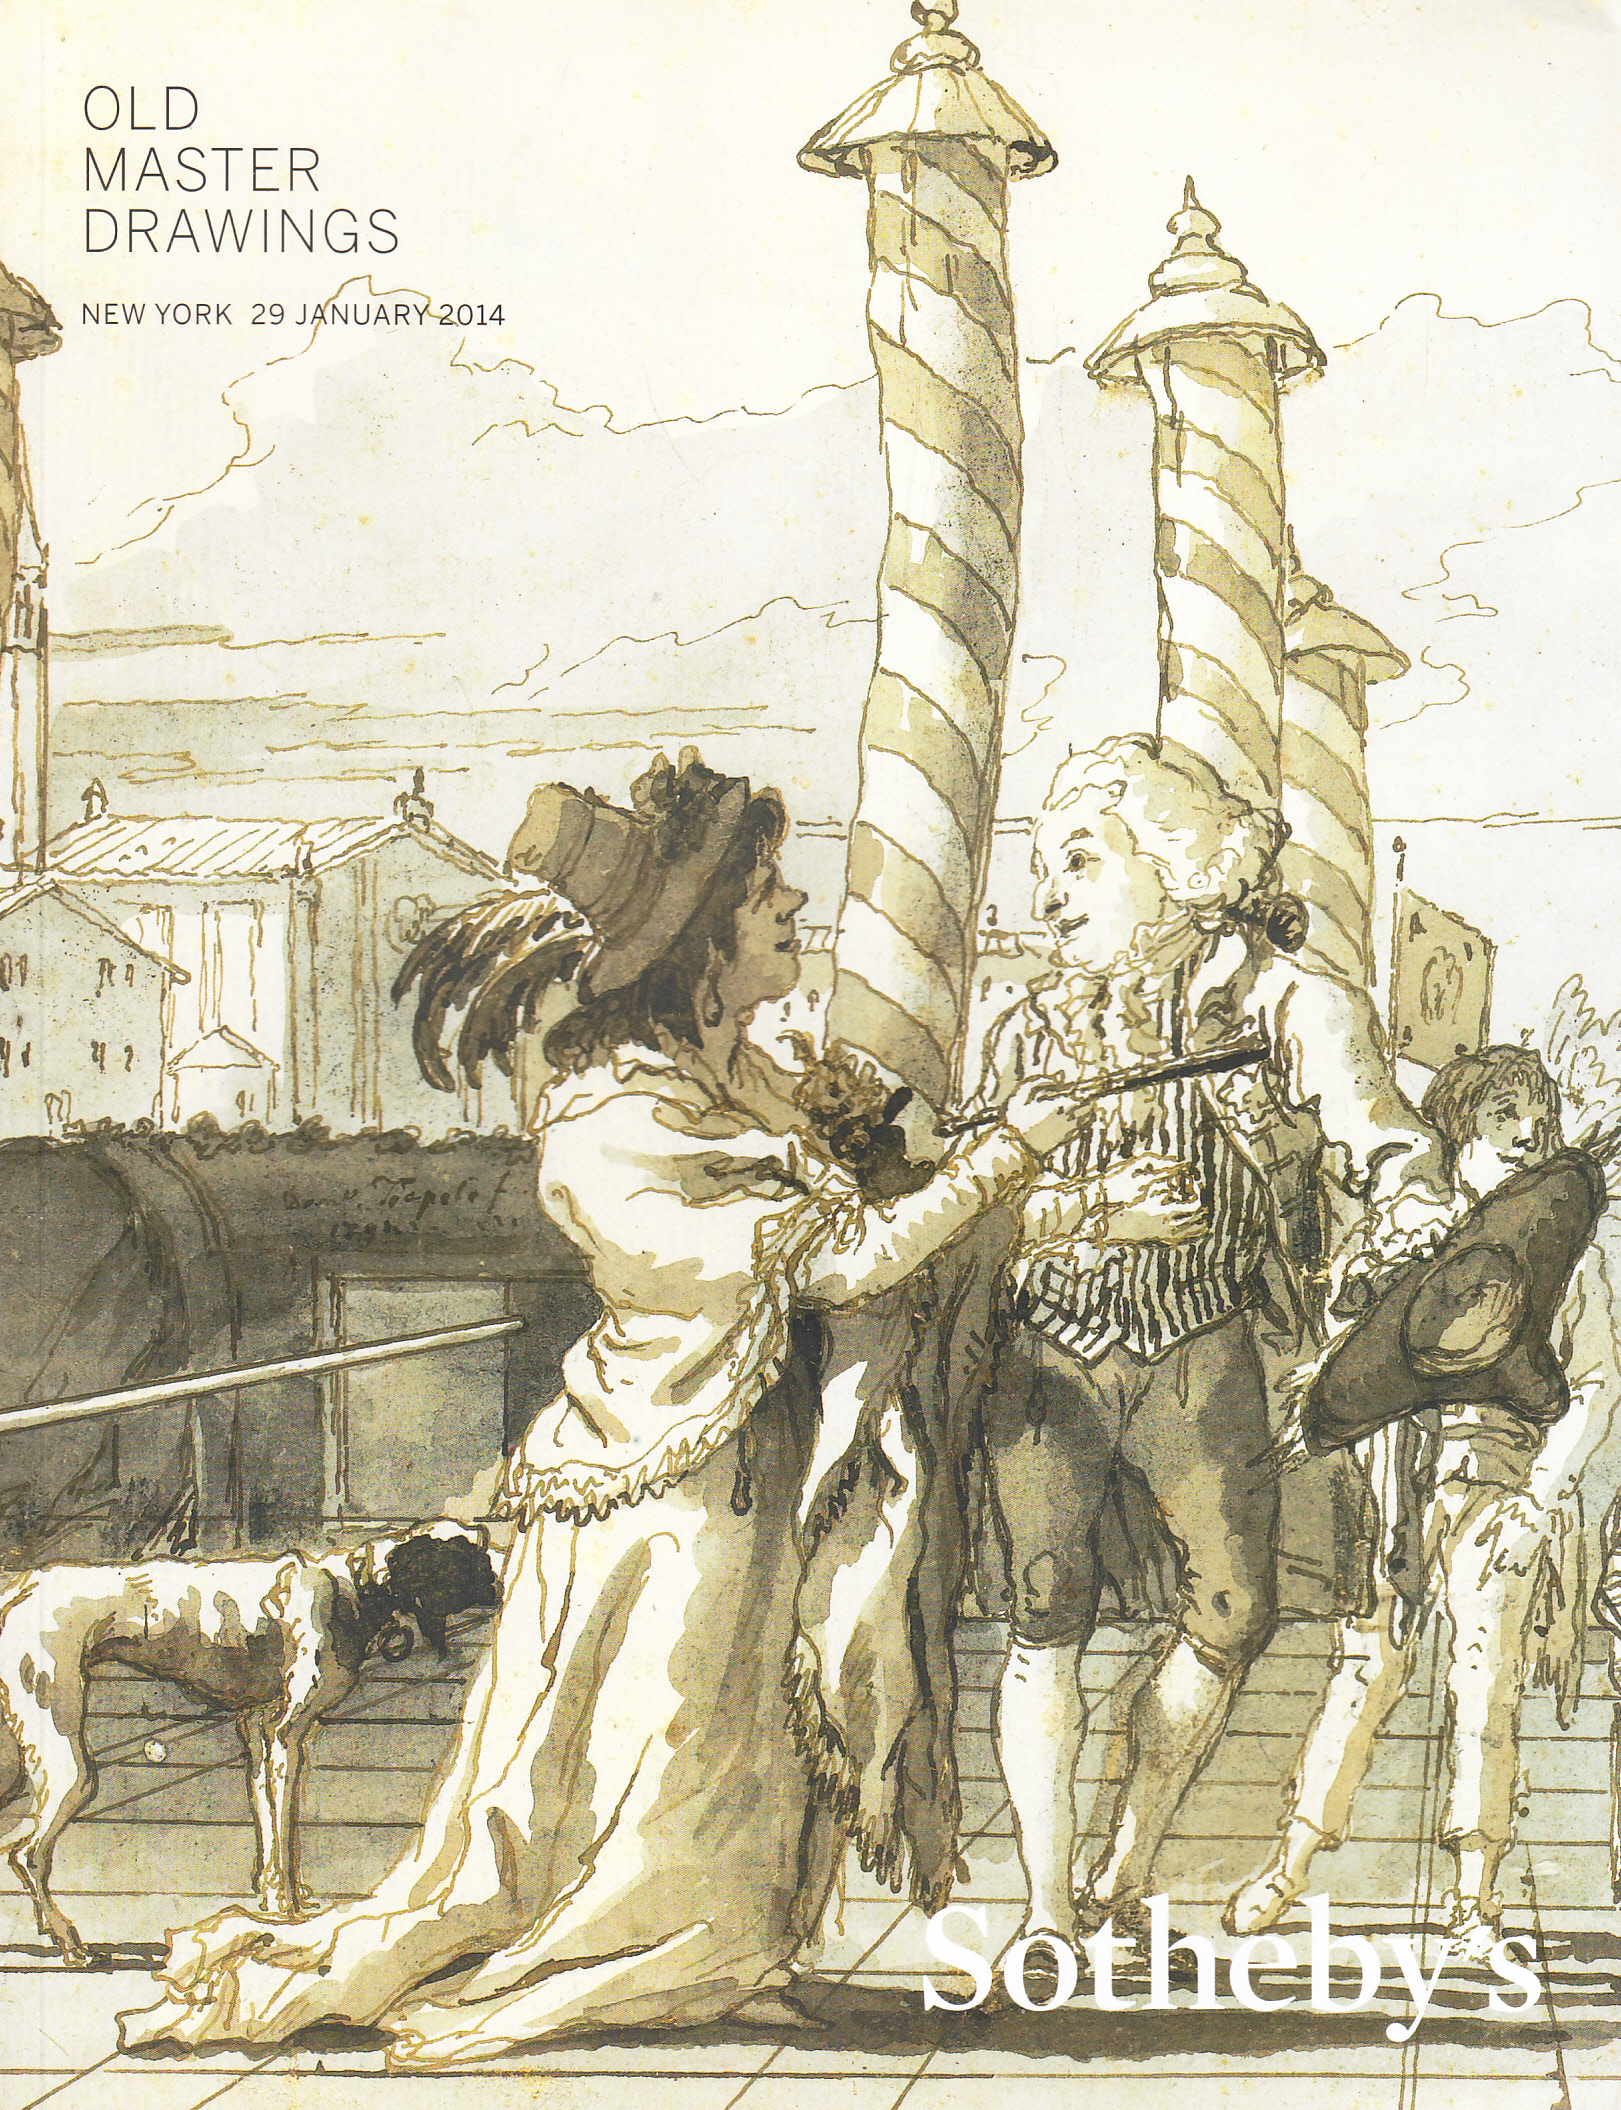 Sotheby's Old Master Drawings New York 1/29/14 Sale 9101 Auction